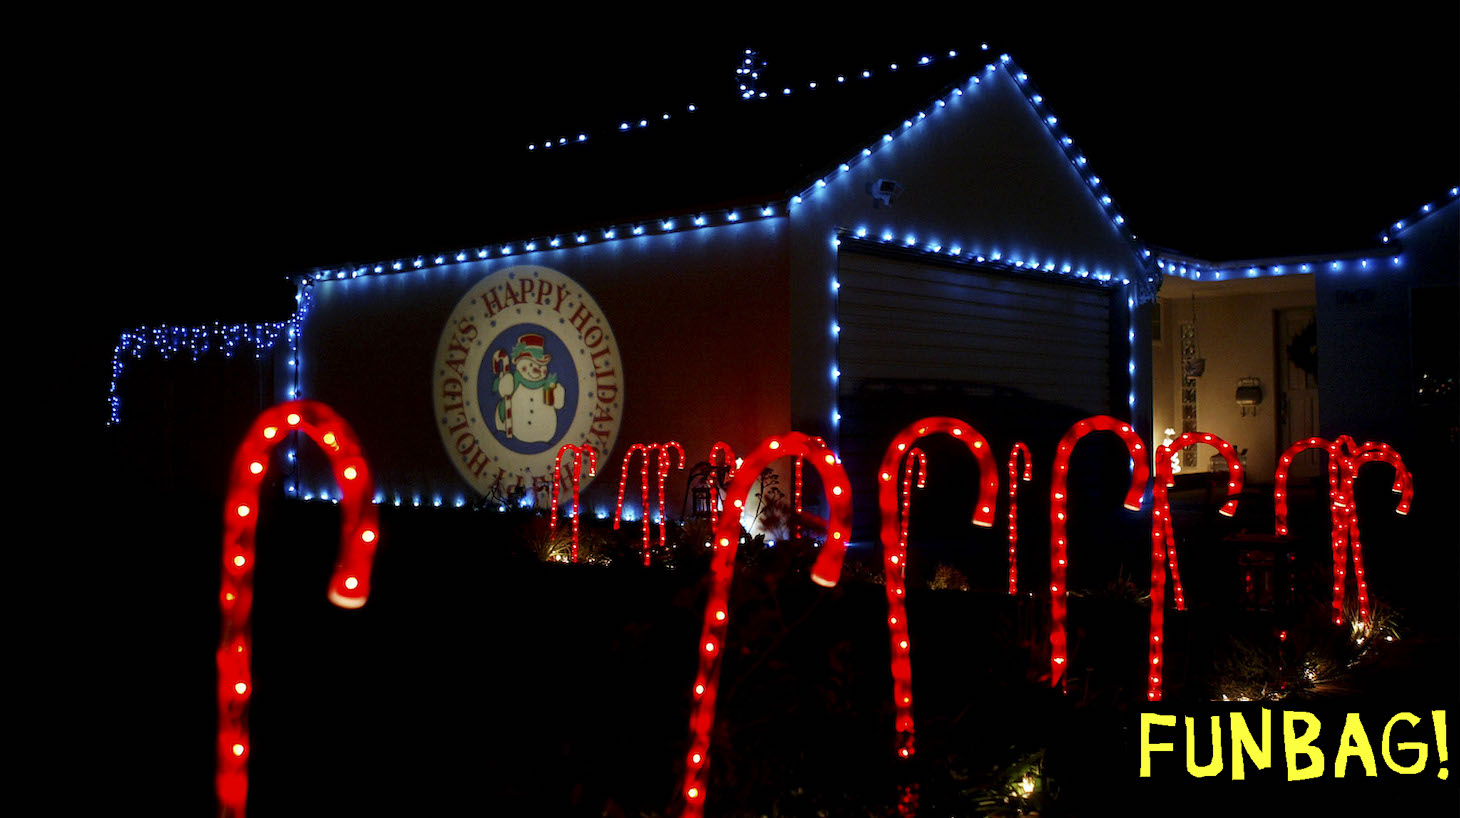 PASADENA, CA, DECEMBER 17: Candy Cane lights and a projected "Happy Holidays" wish adorn a house on December 17, 2003 in Pasadena, California. Many of southern California's better holiday lights displays are in Pasadena. (Photo by David McNew/Getty Images)